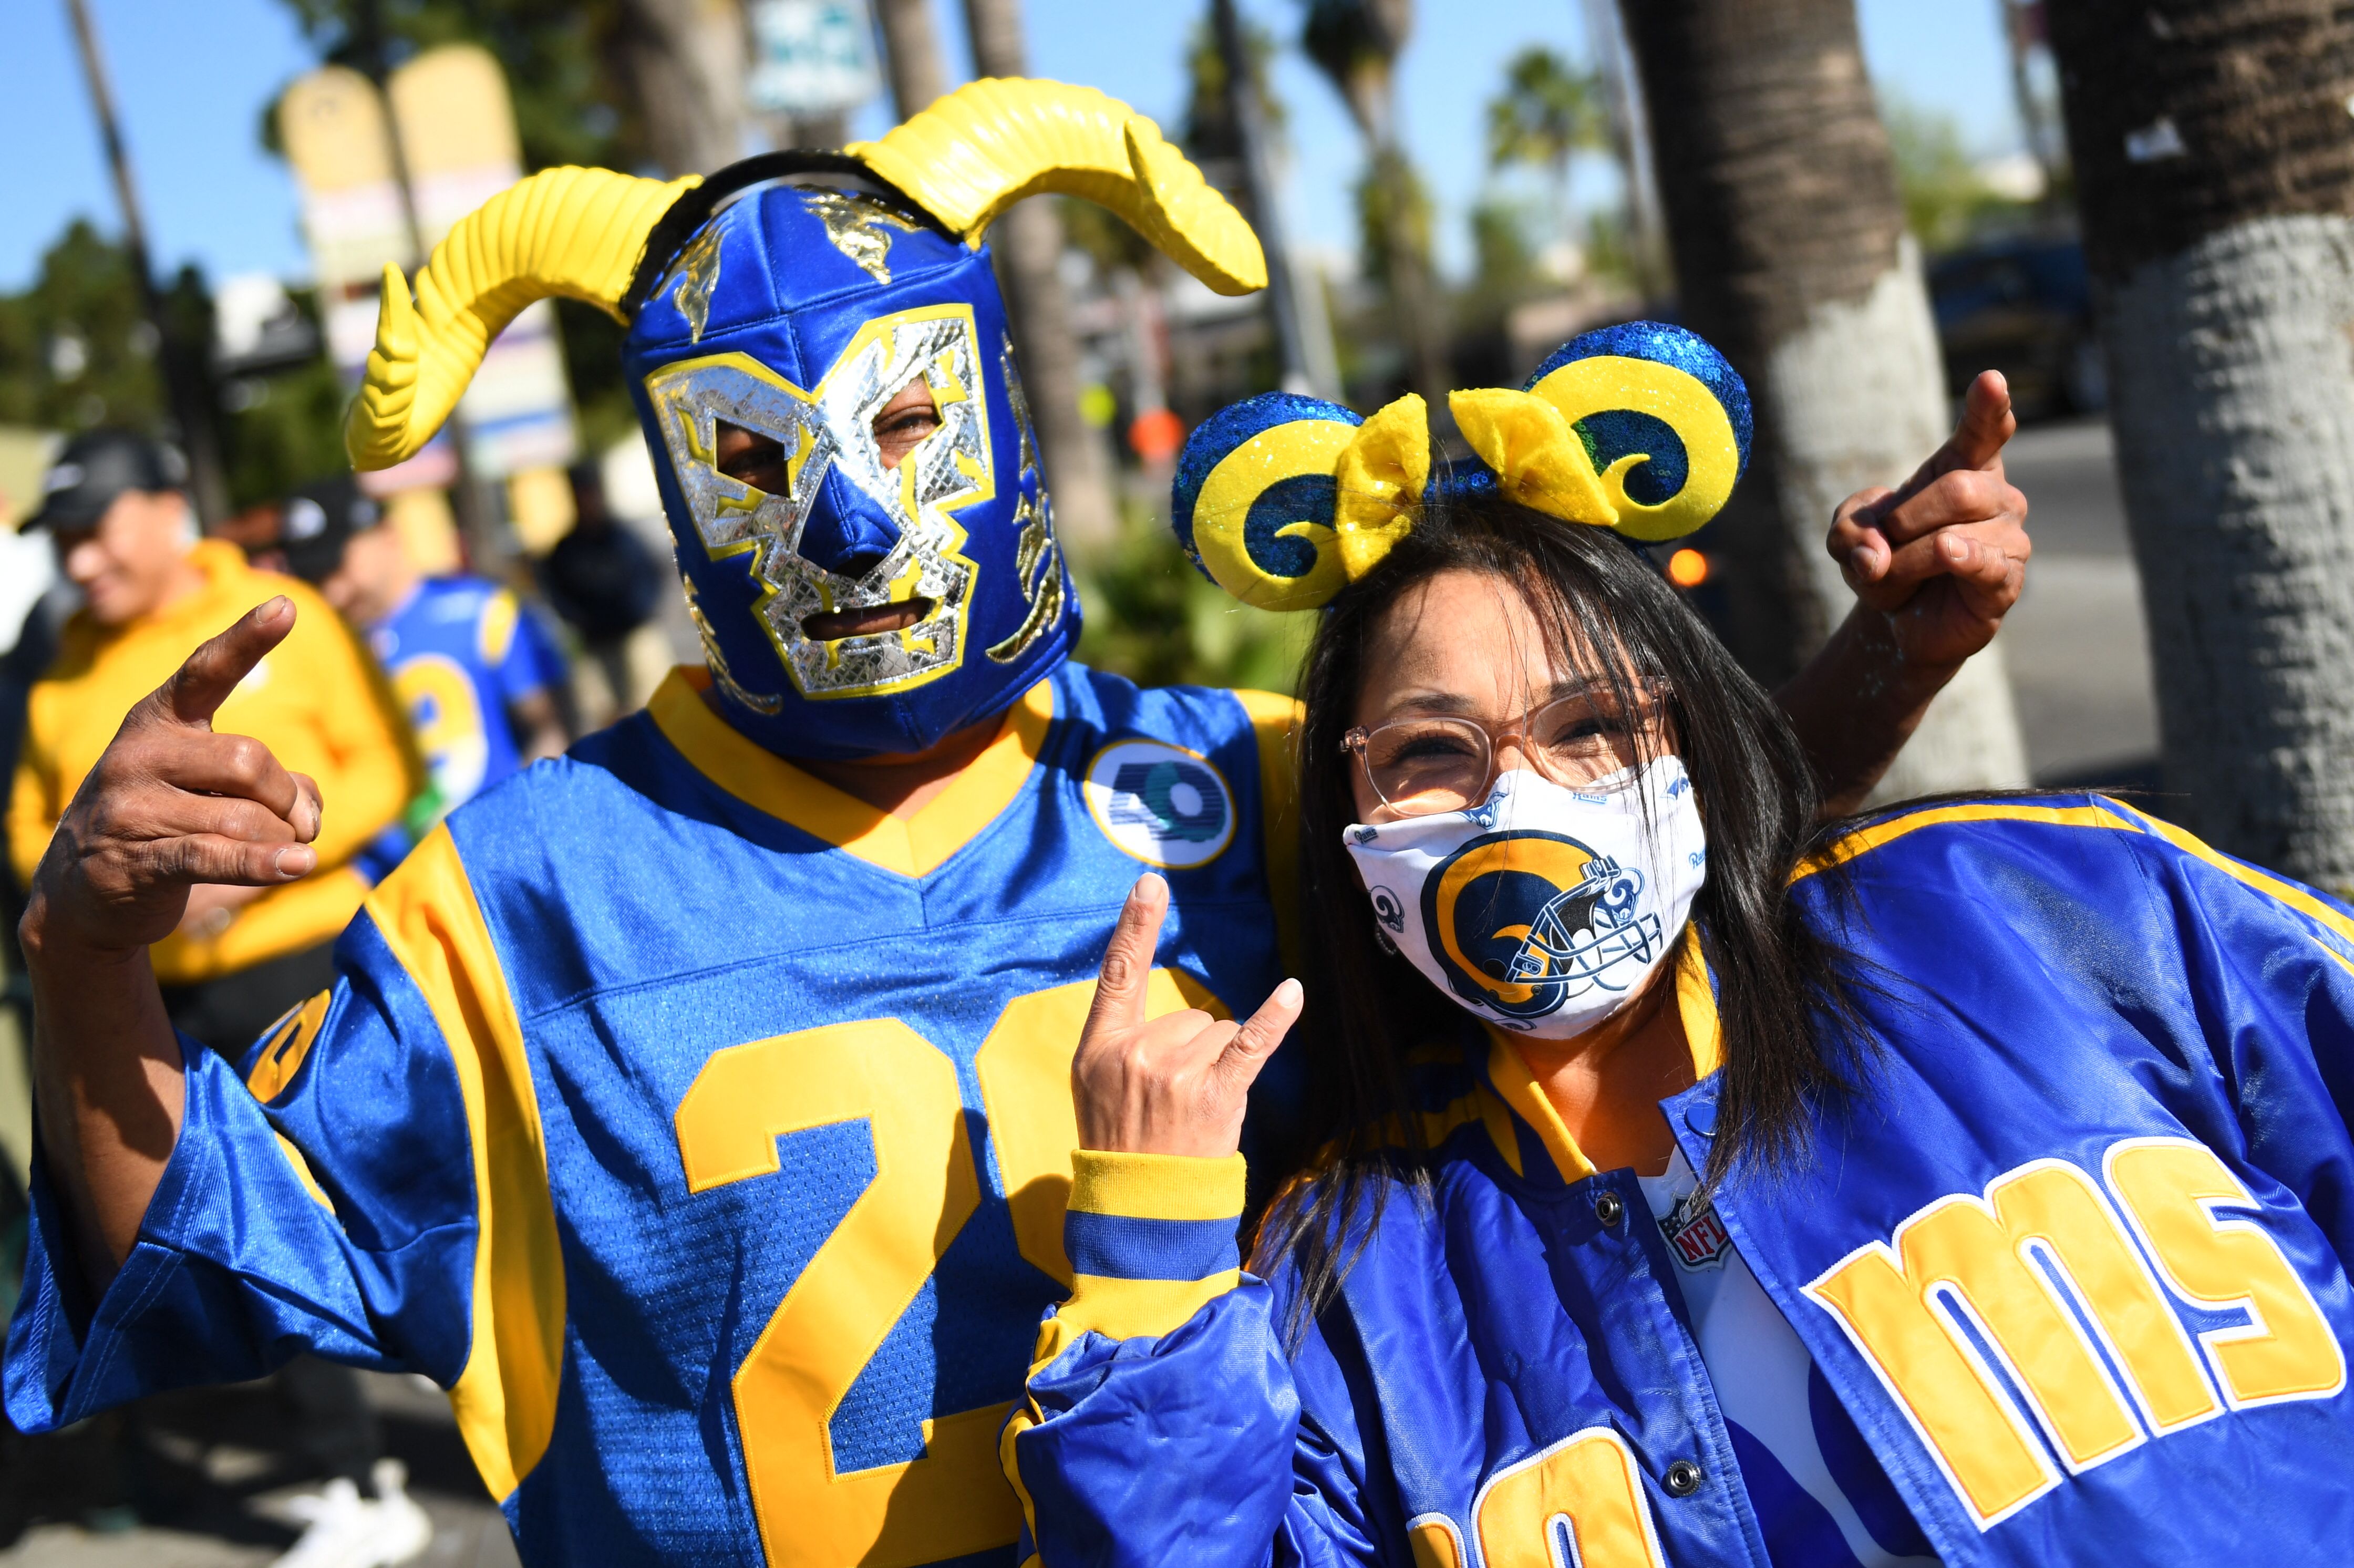 Rams fans celebrate Super Bowl parade in L.A. - Los Angeles Times